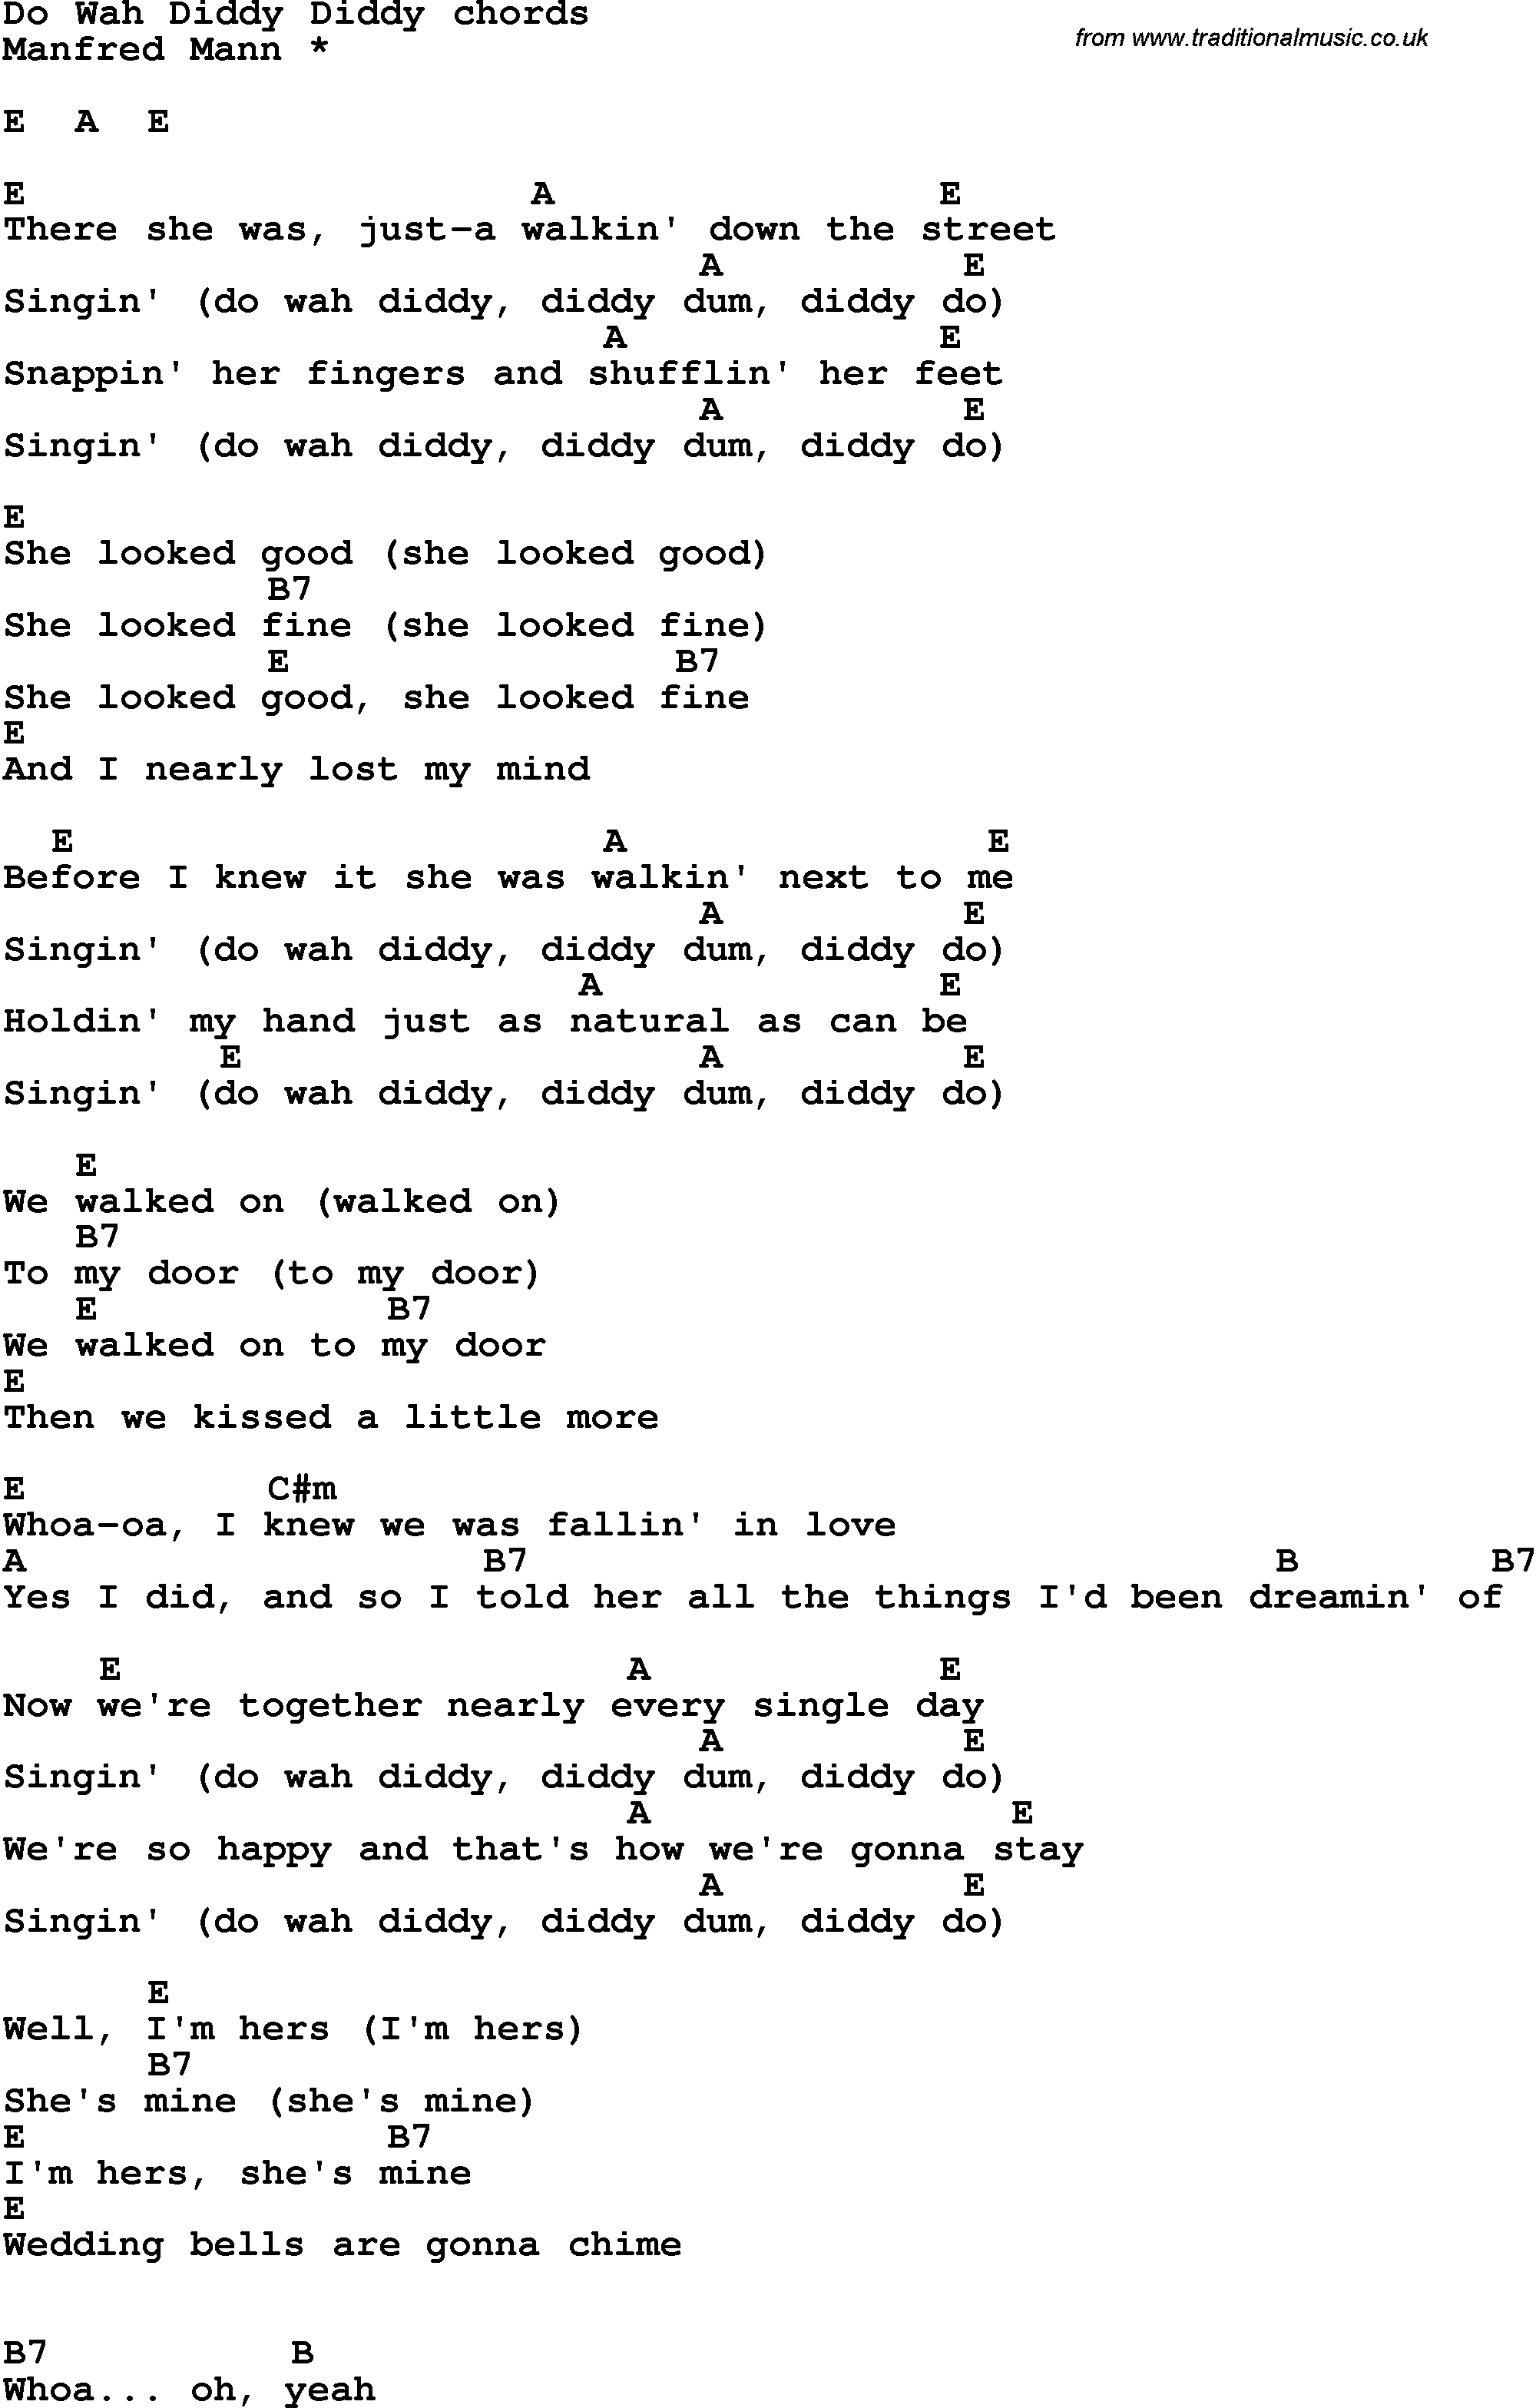 Song Lyrics with guitar chords for Do Wah Diddy